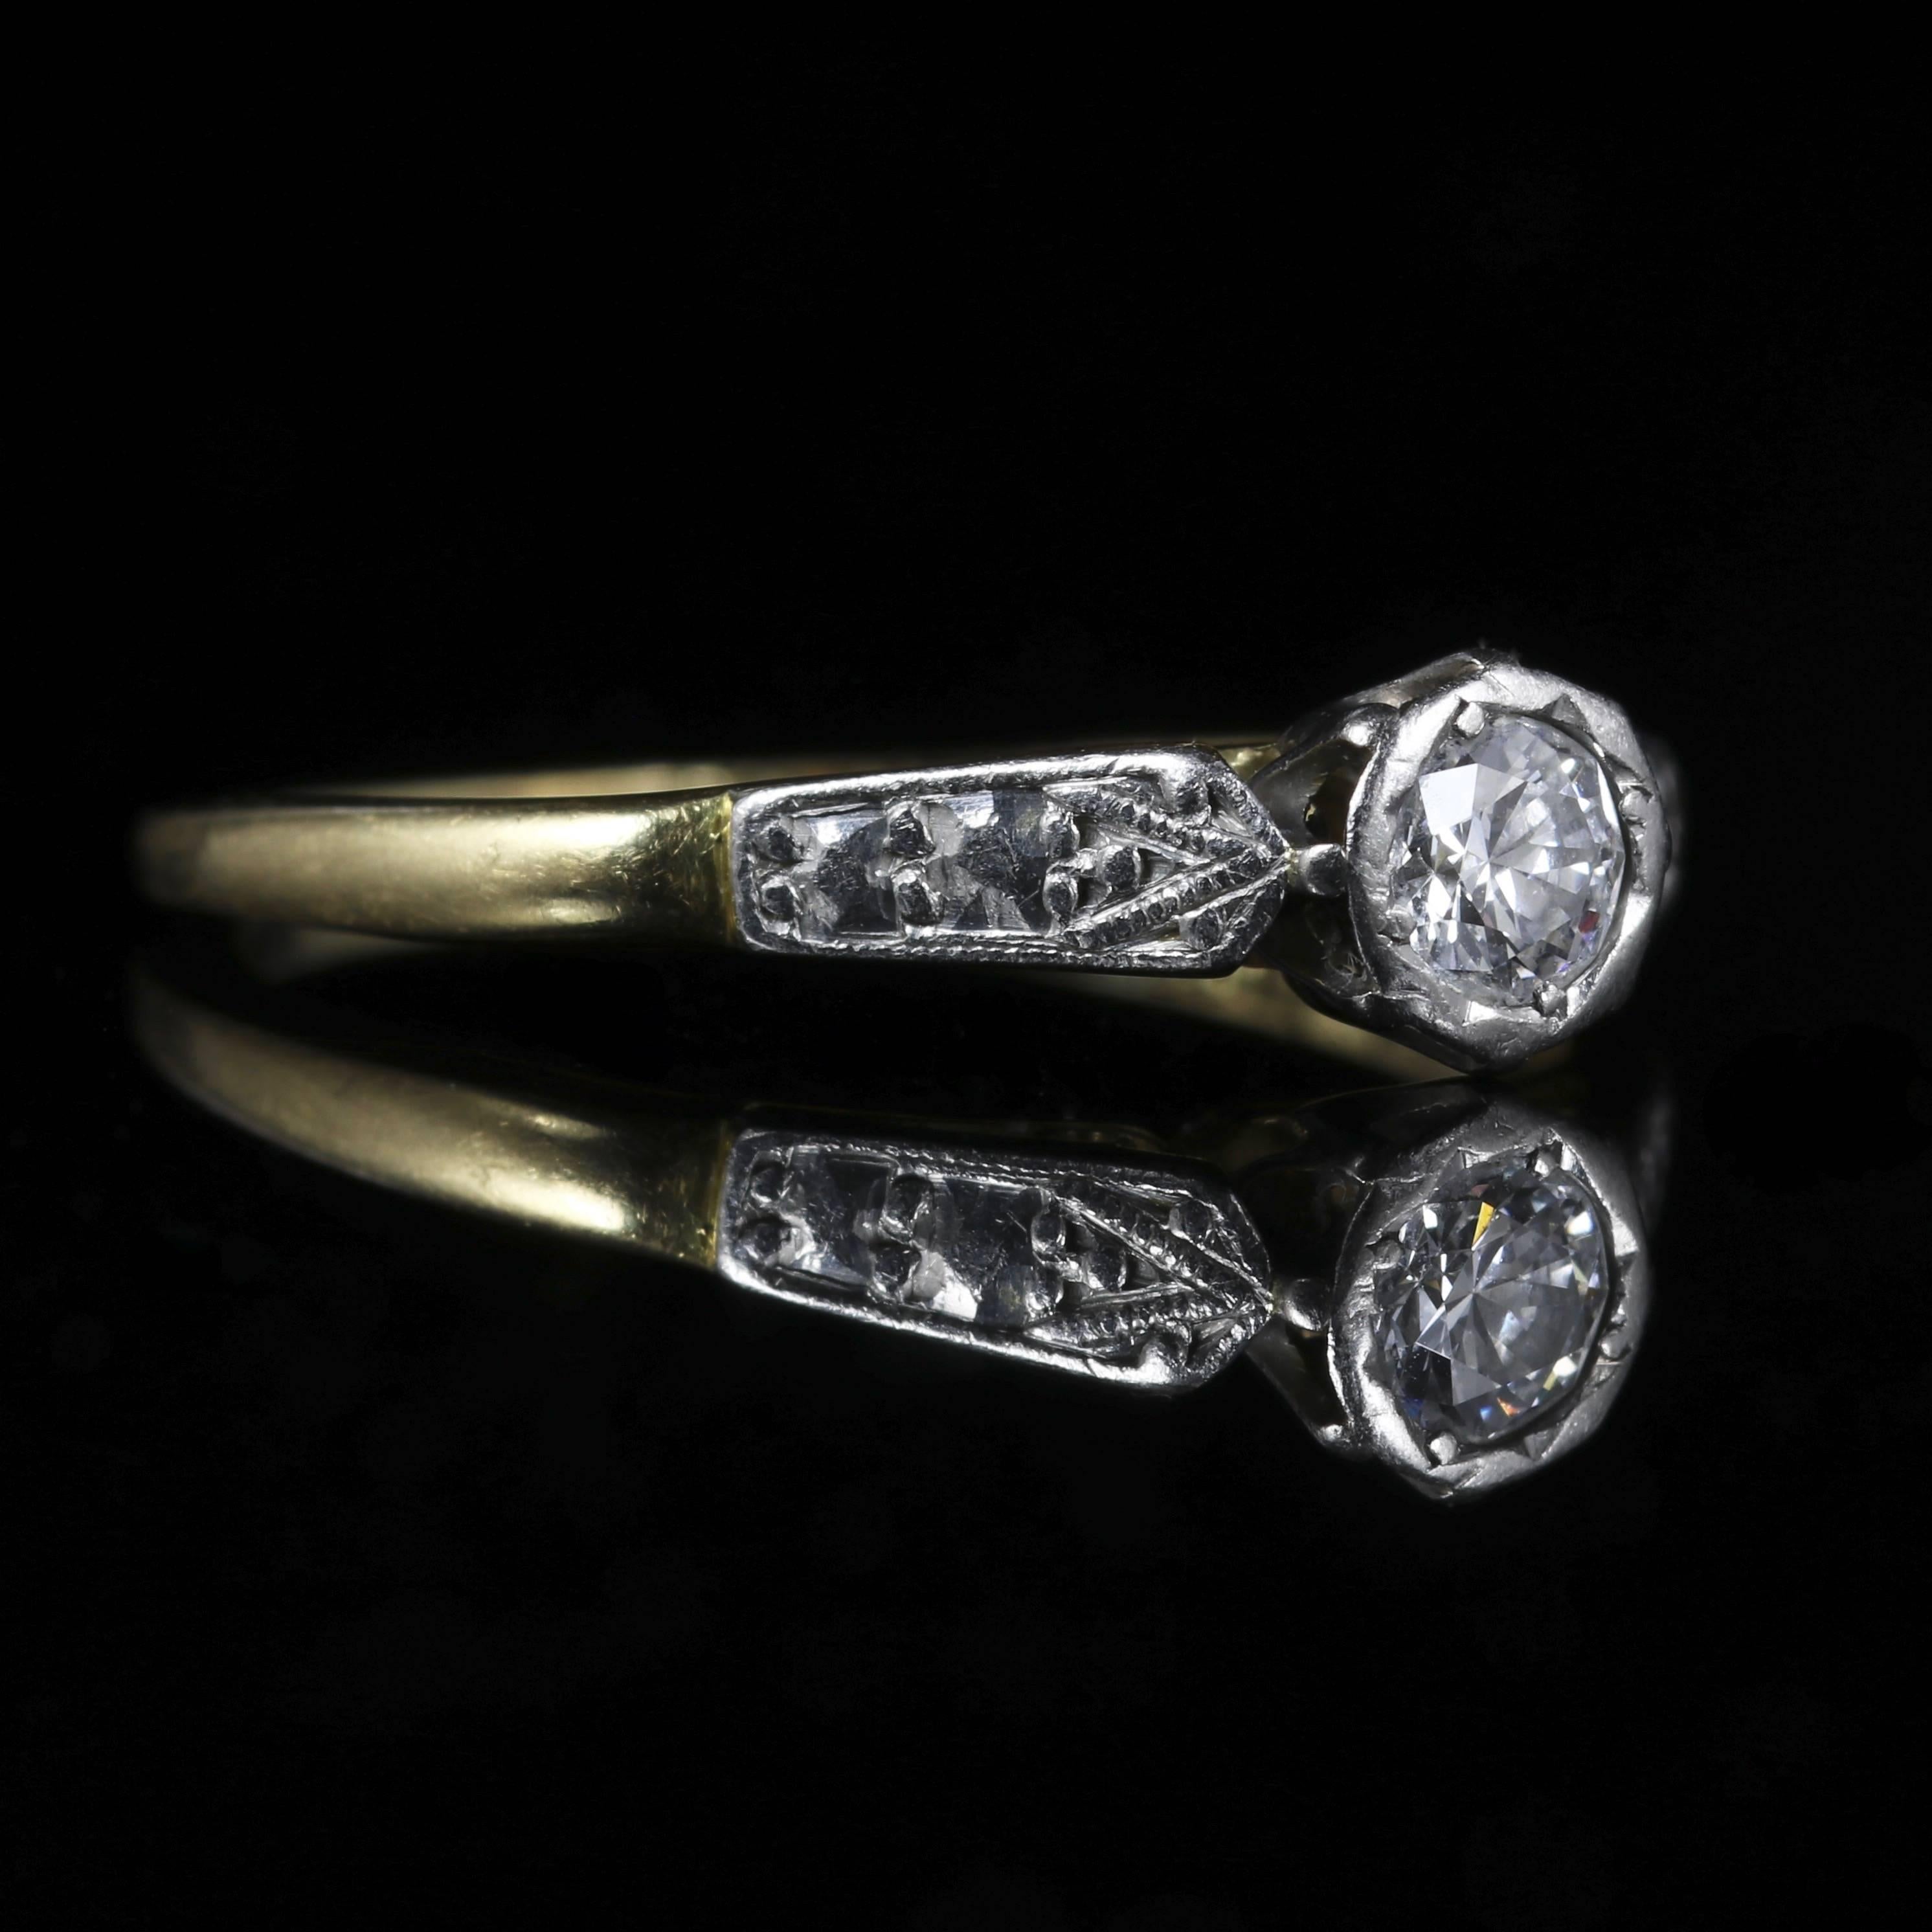 This fabulous Edwardian 18ct Yellow Gold Diamond ring is set with a 0.20ct Diamond.

The Diamond has superb clarity and is SI 1 H colour.

Diamonds sparkle continuously and beautifully captivating the allure of natures beauty.

Diamond is the